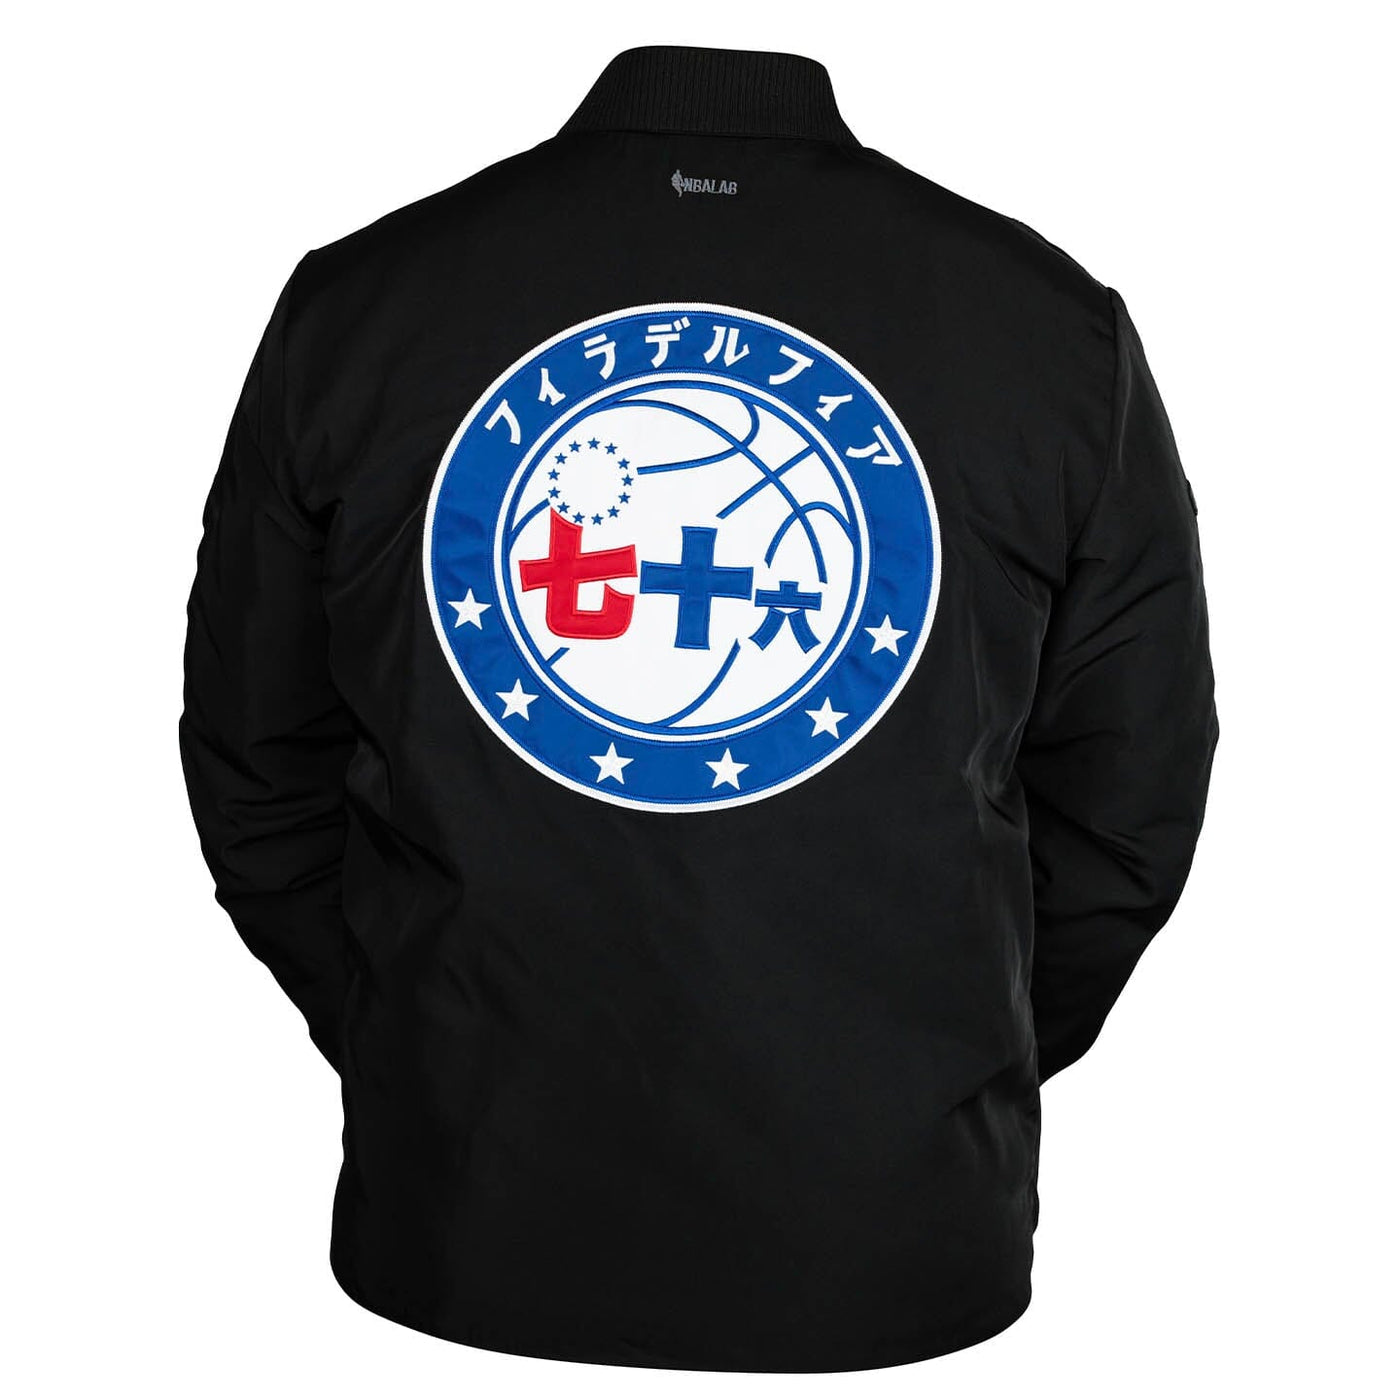 76ers apparel for women